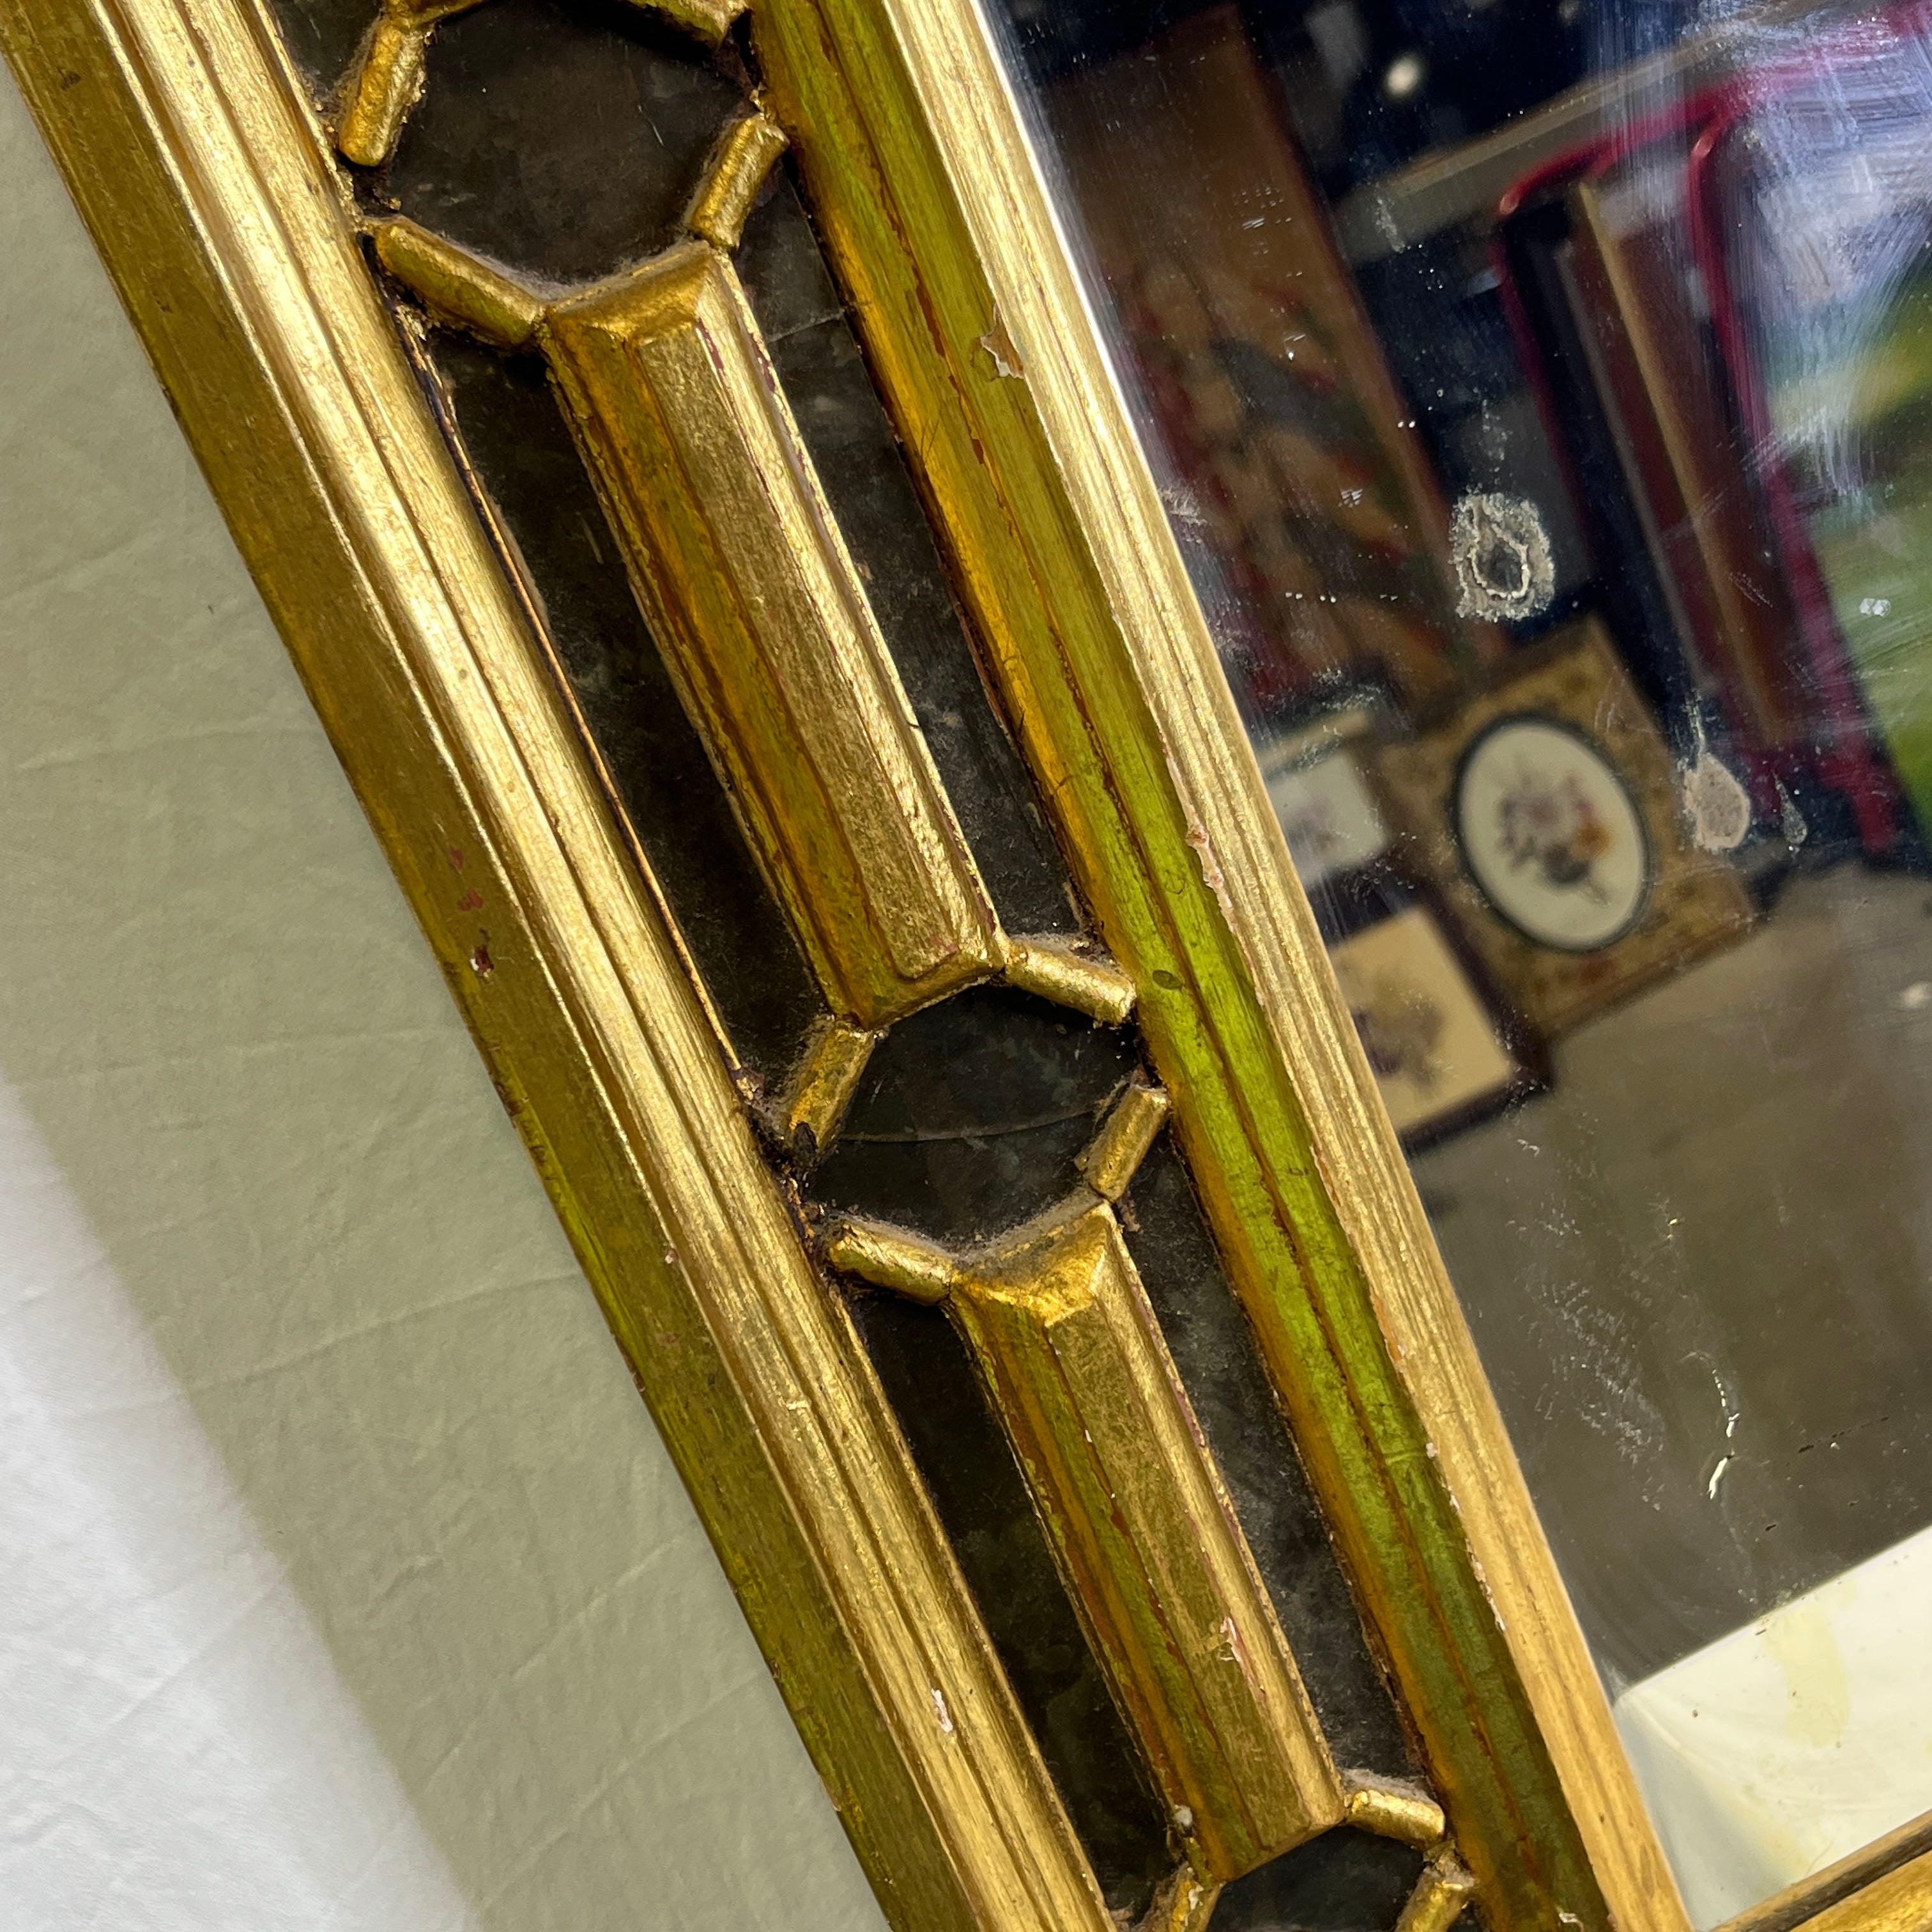 Gesso Giltwood Geometric Inlay with Smoked Bolted Mirrored Glass Accents Wall Hanging Mirror